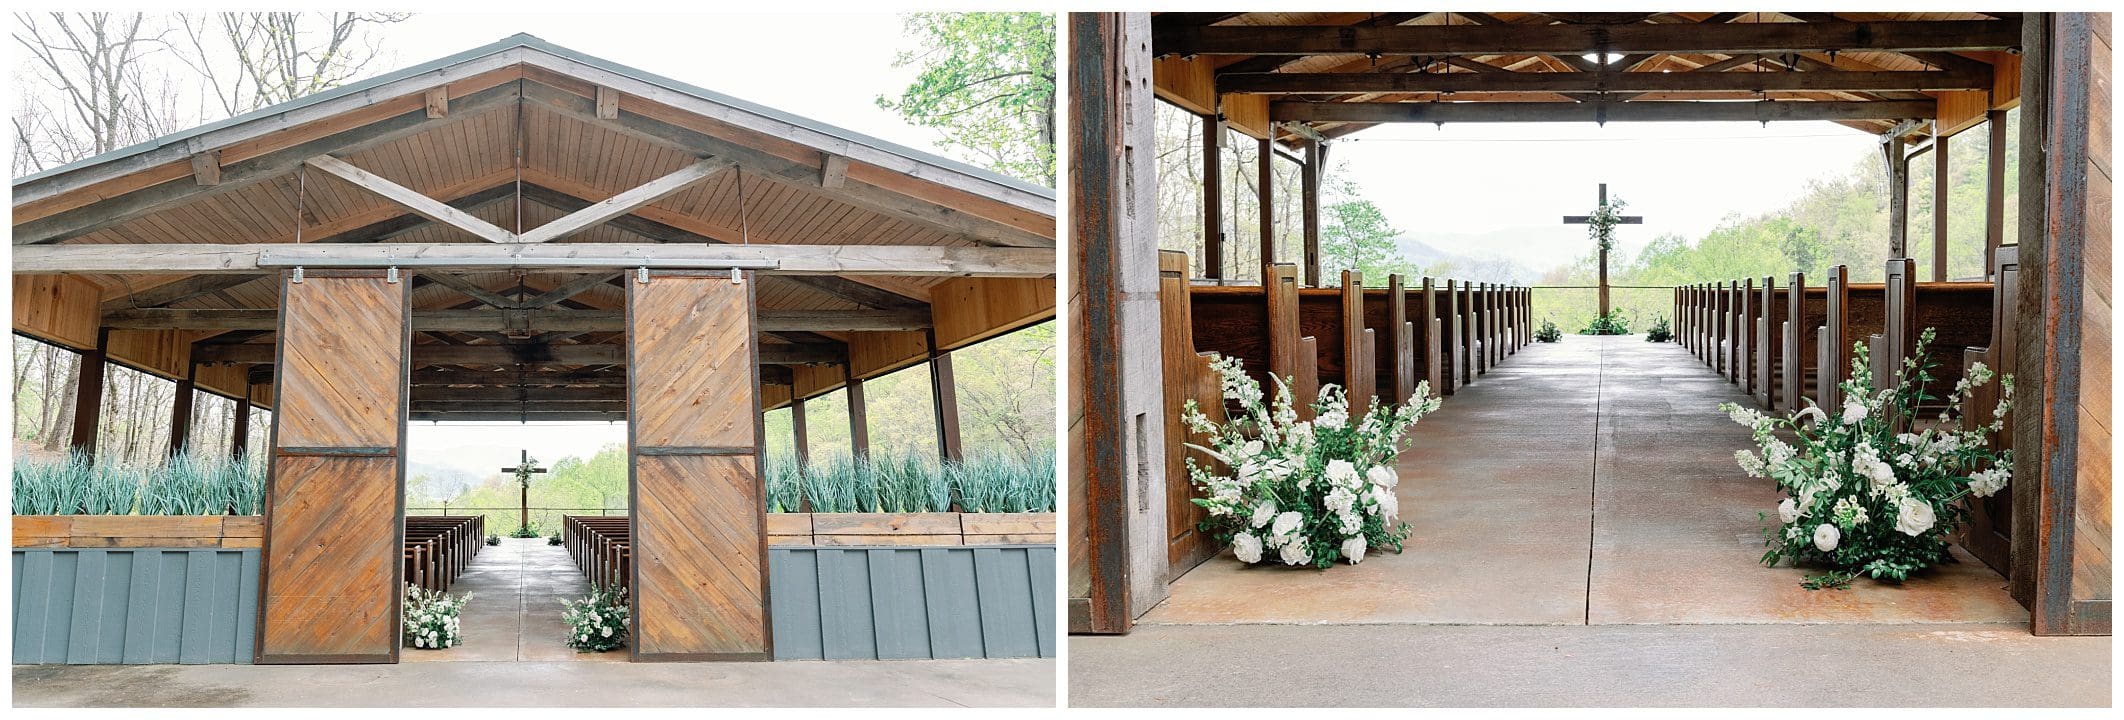 Wooden pavilion decorated with flowers along a concrete aisle, surrounded by nature, designed for events.